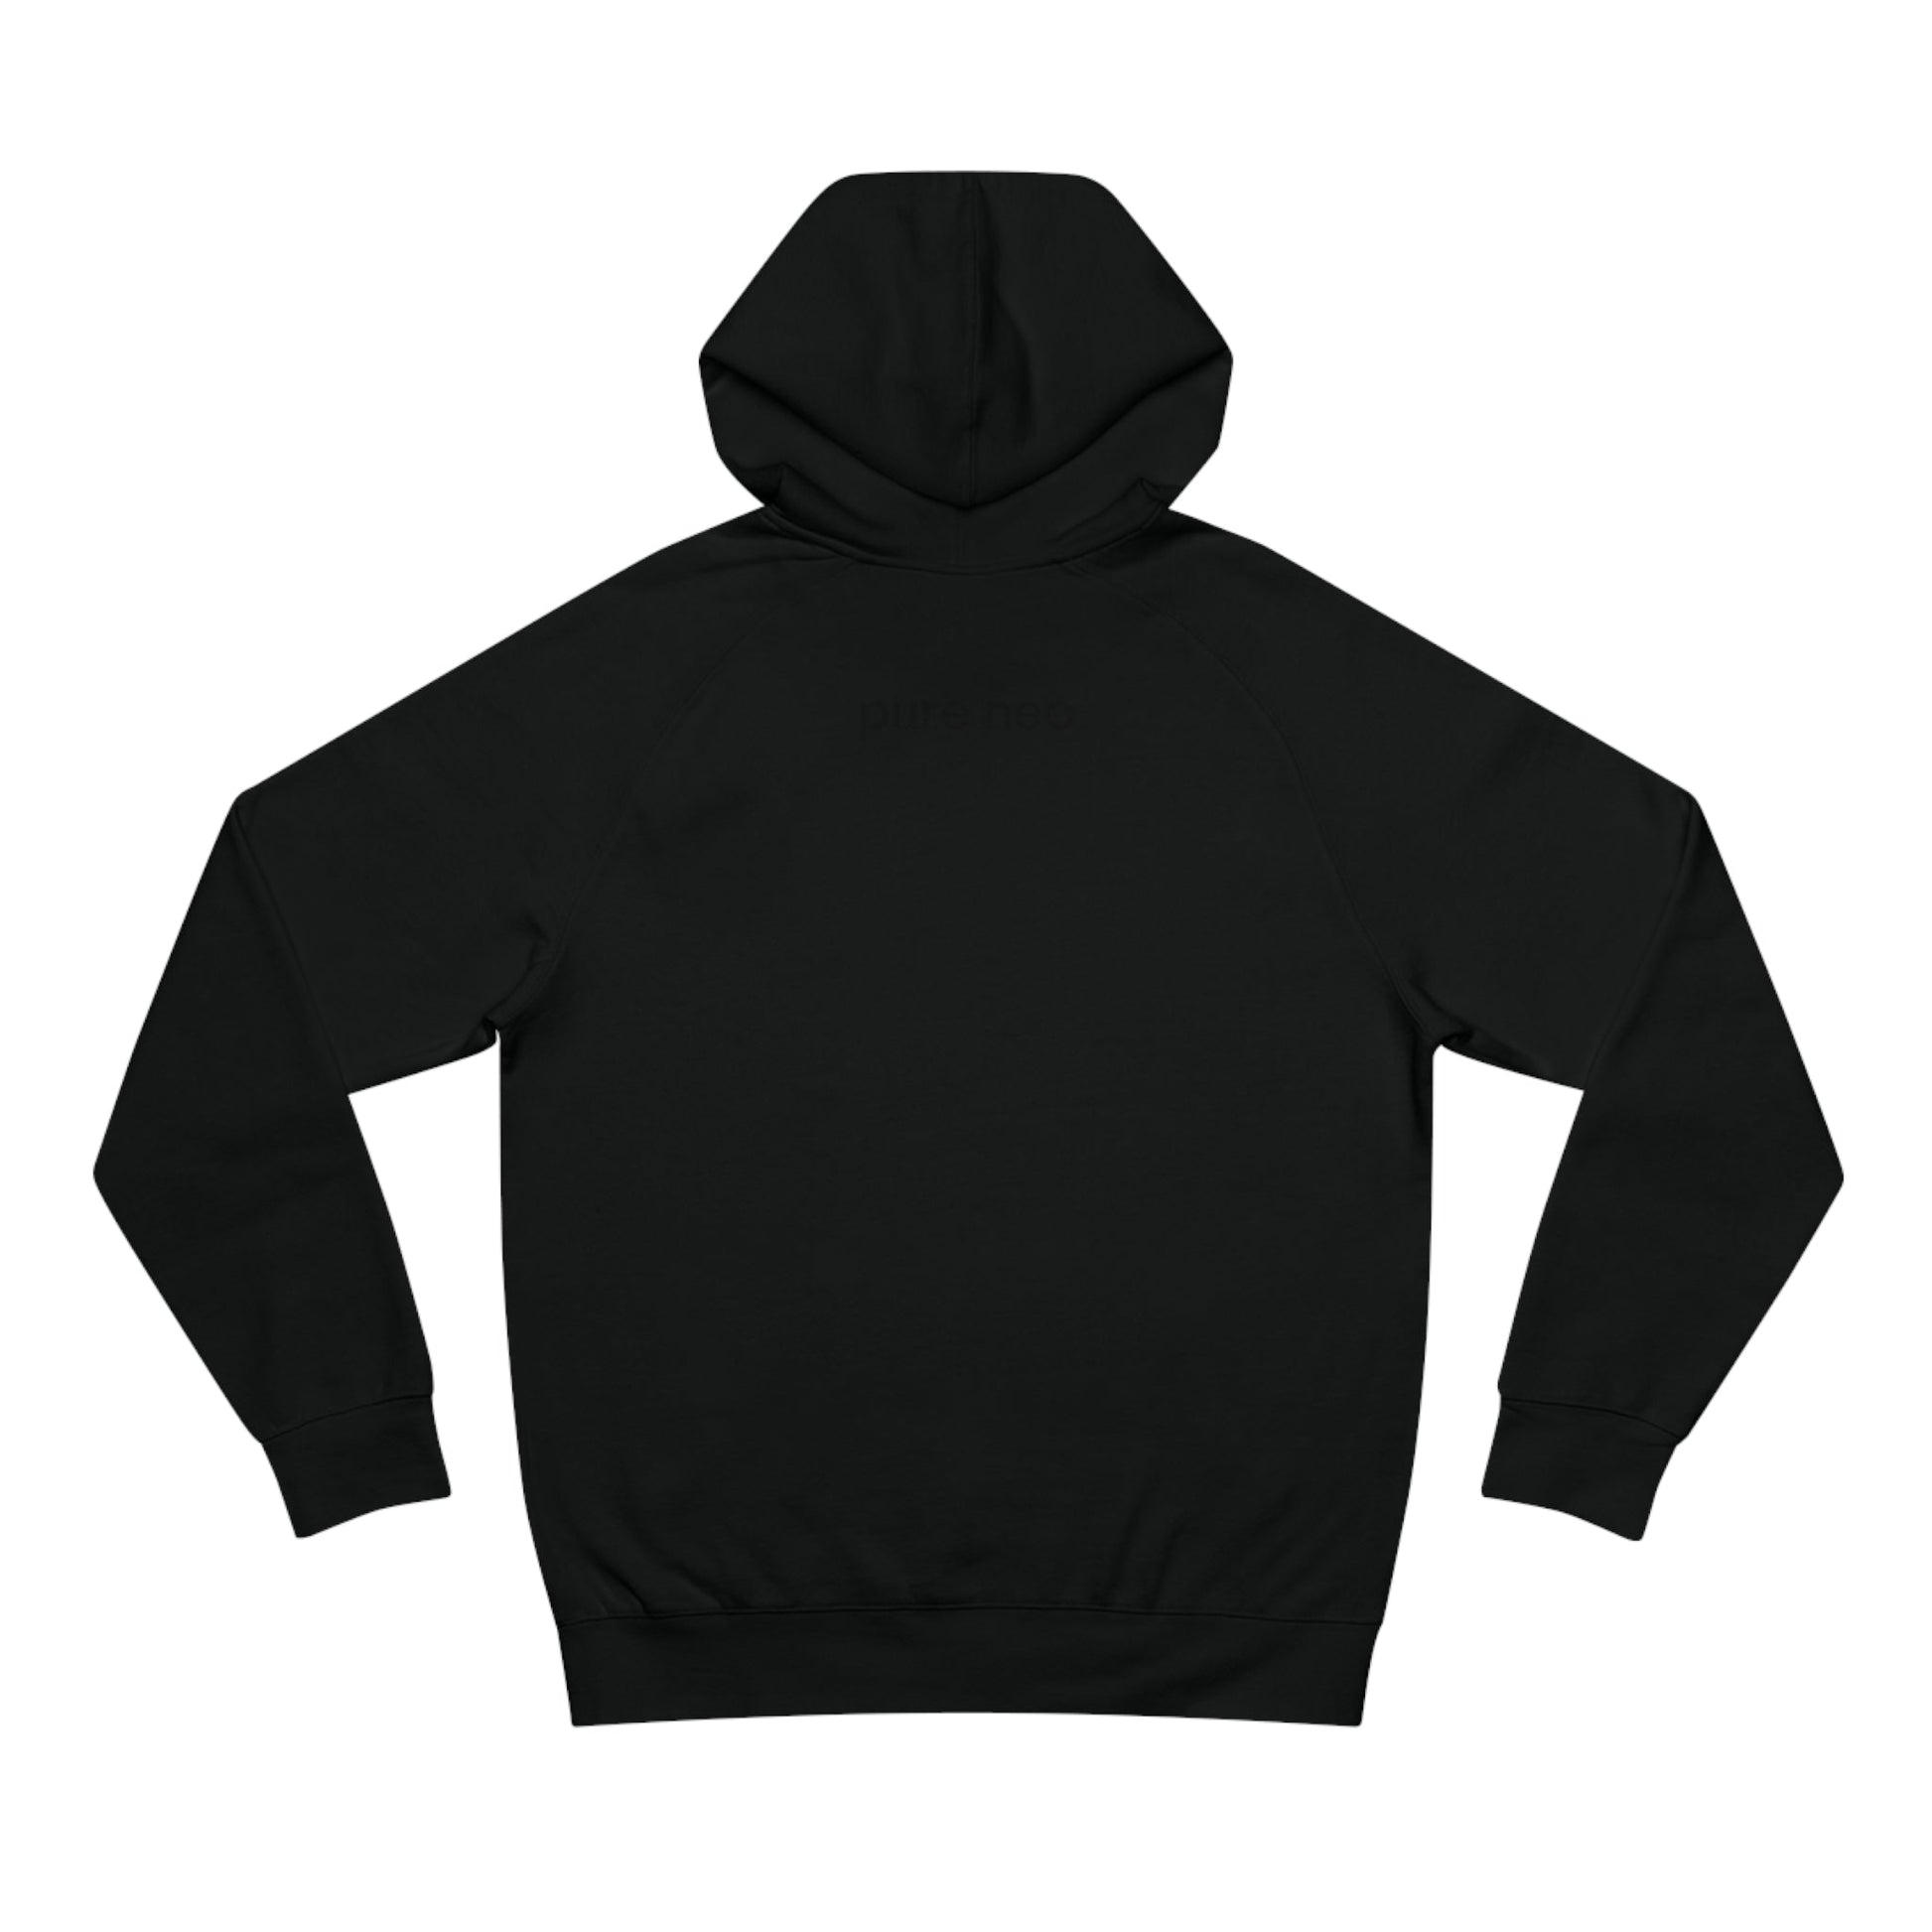 My vinyl collection is better than yours hoodie - black on black - Pure Neo Shop